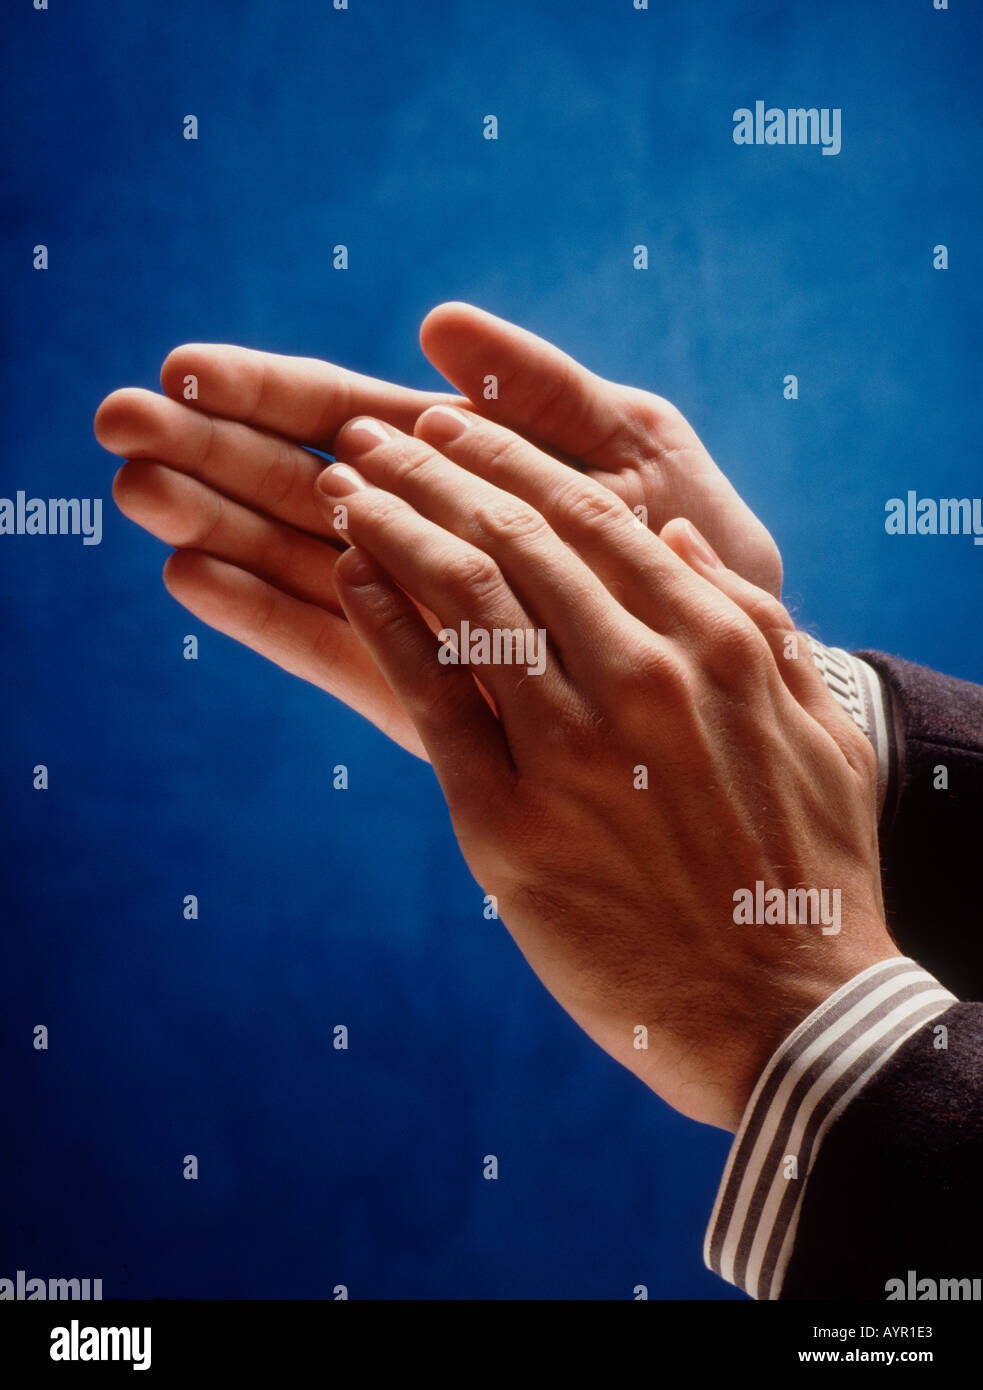 Man's hands clapping. Applause Stock Photo